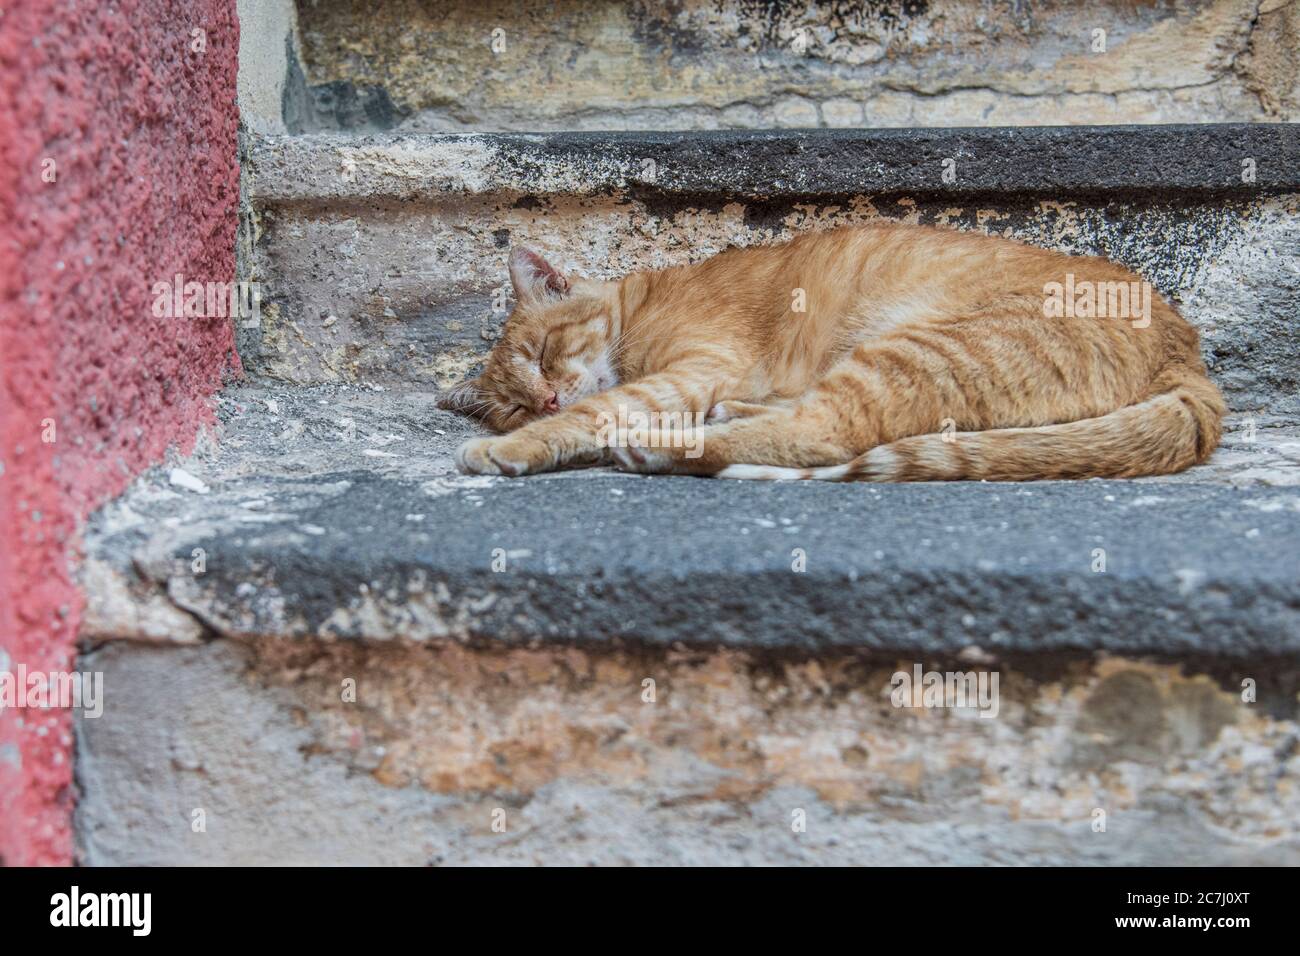 Sicily - Sunny impressions of the Aeolian Islands, also known as Aeolian Islands or Isole Eolie: Lipari, Stromboli, Salina, Vulcano, Panarea, Filicudi and Alicudi. Cat is lounging in the shade on a staircase. Salina. Stock Photo